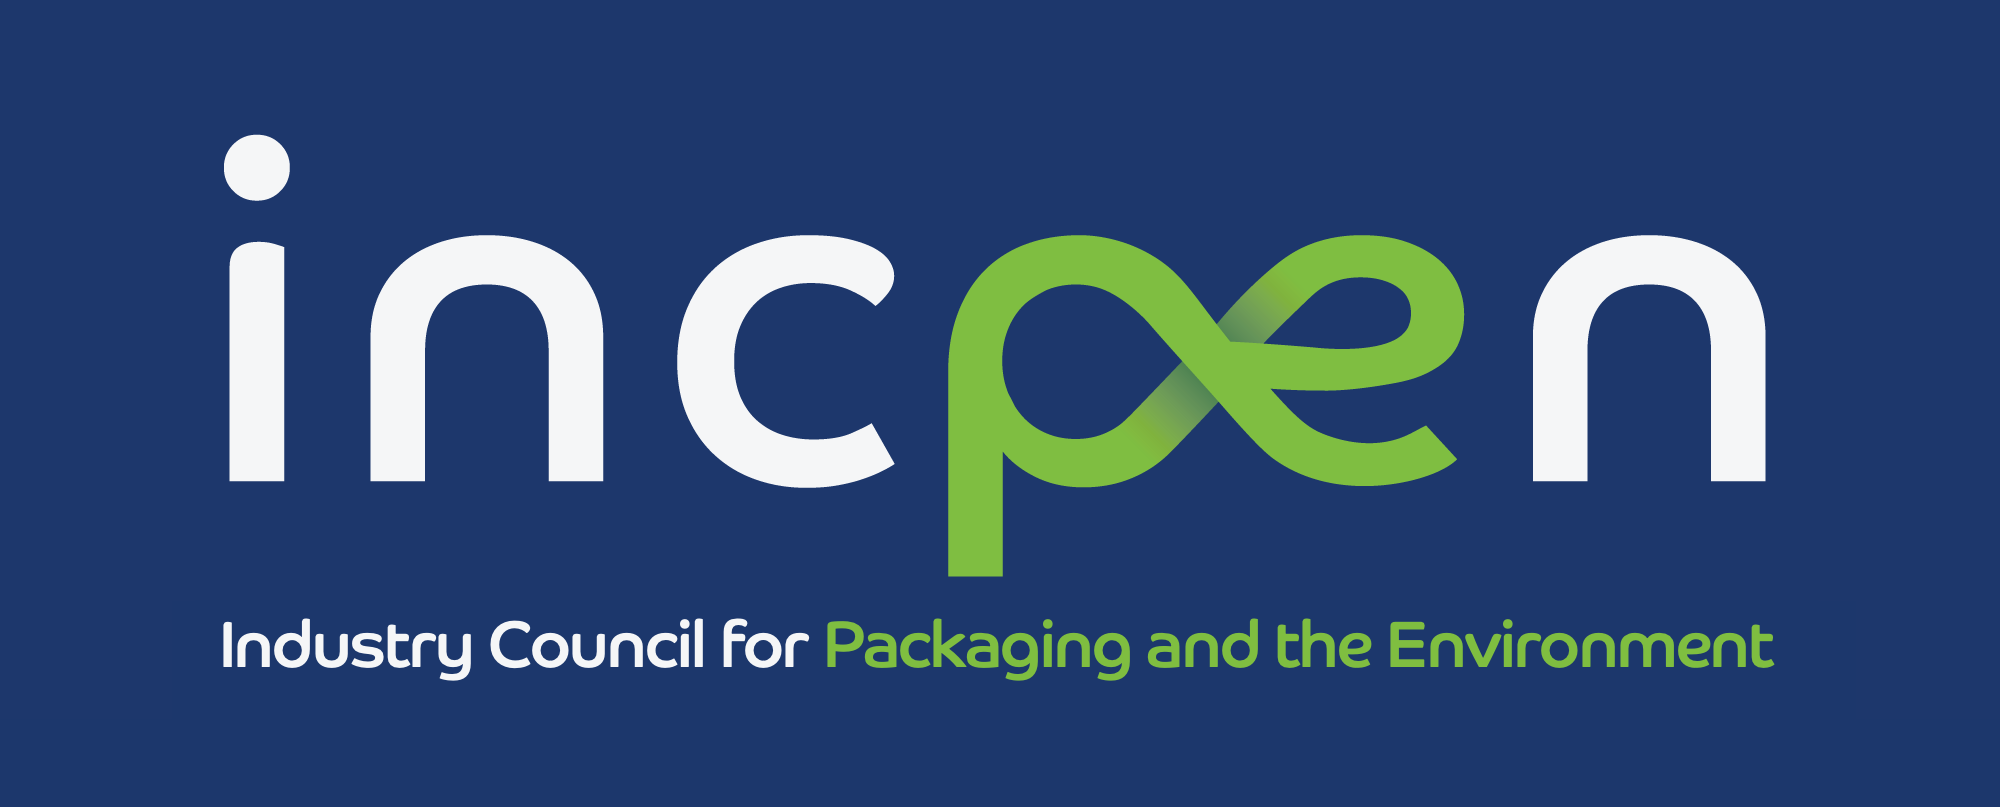 logo for Industry Council for Packaging and the Environment - INCPEN